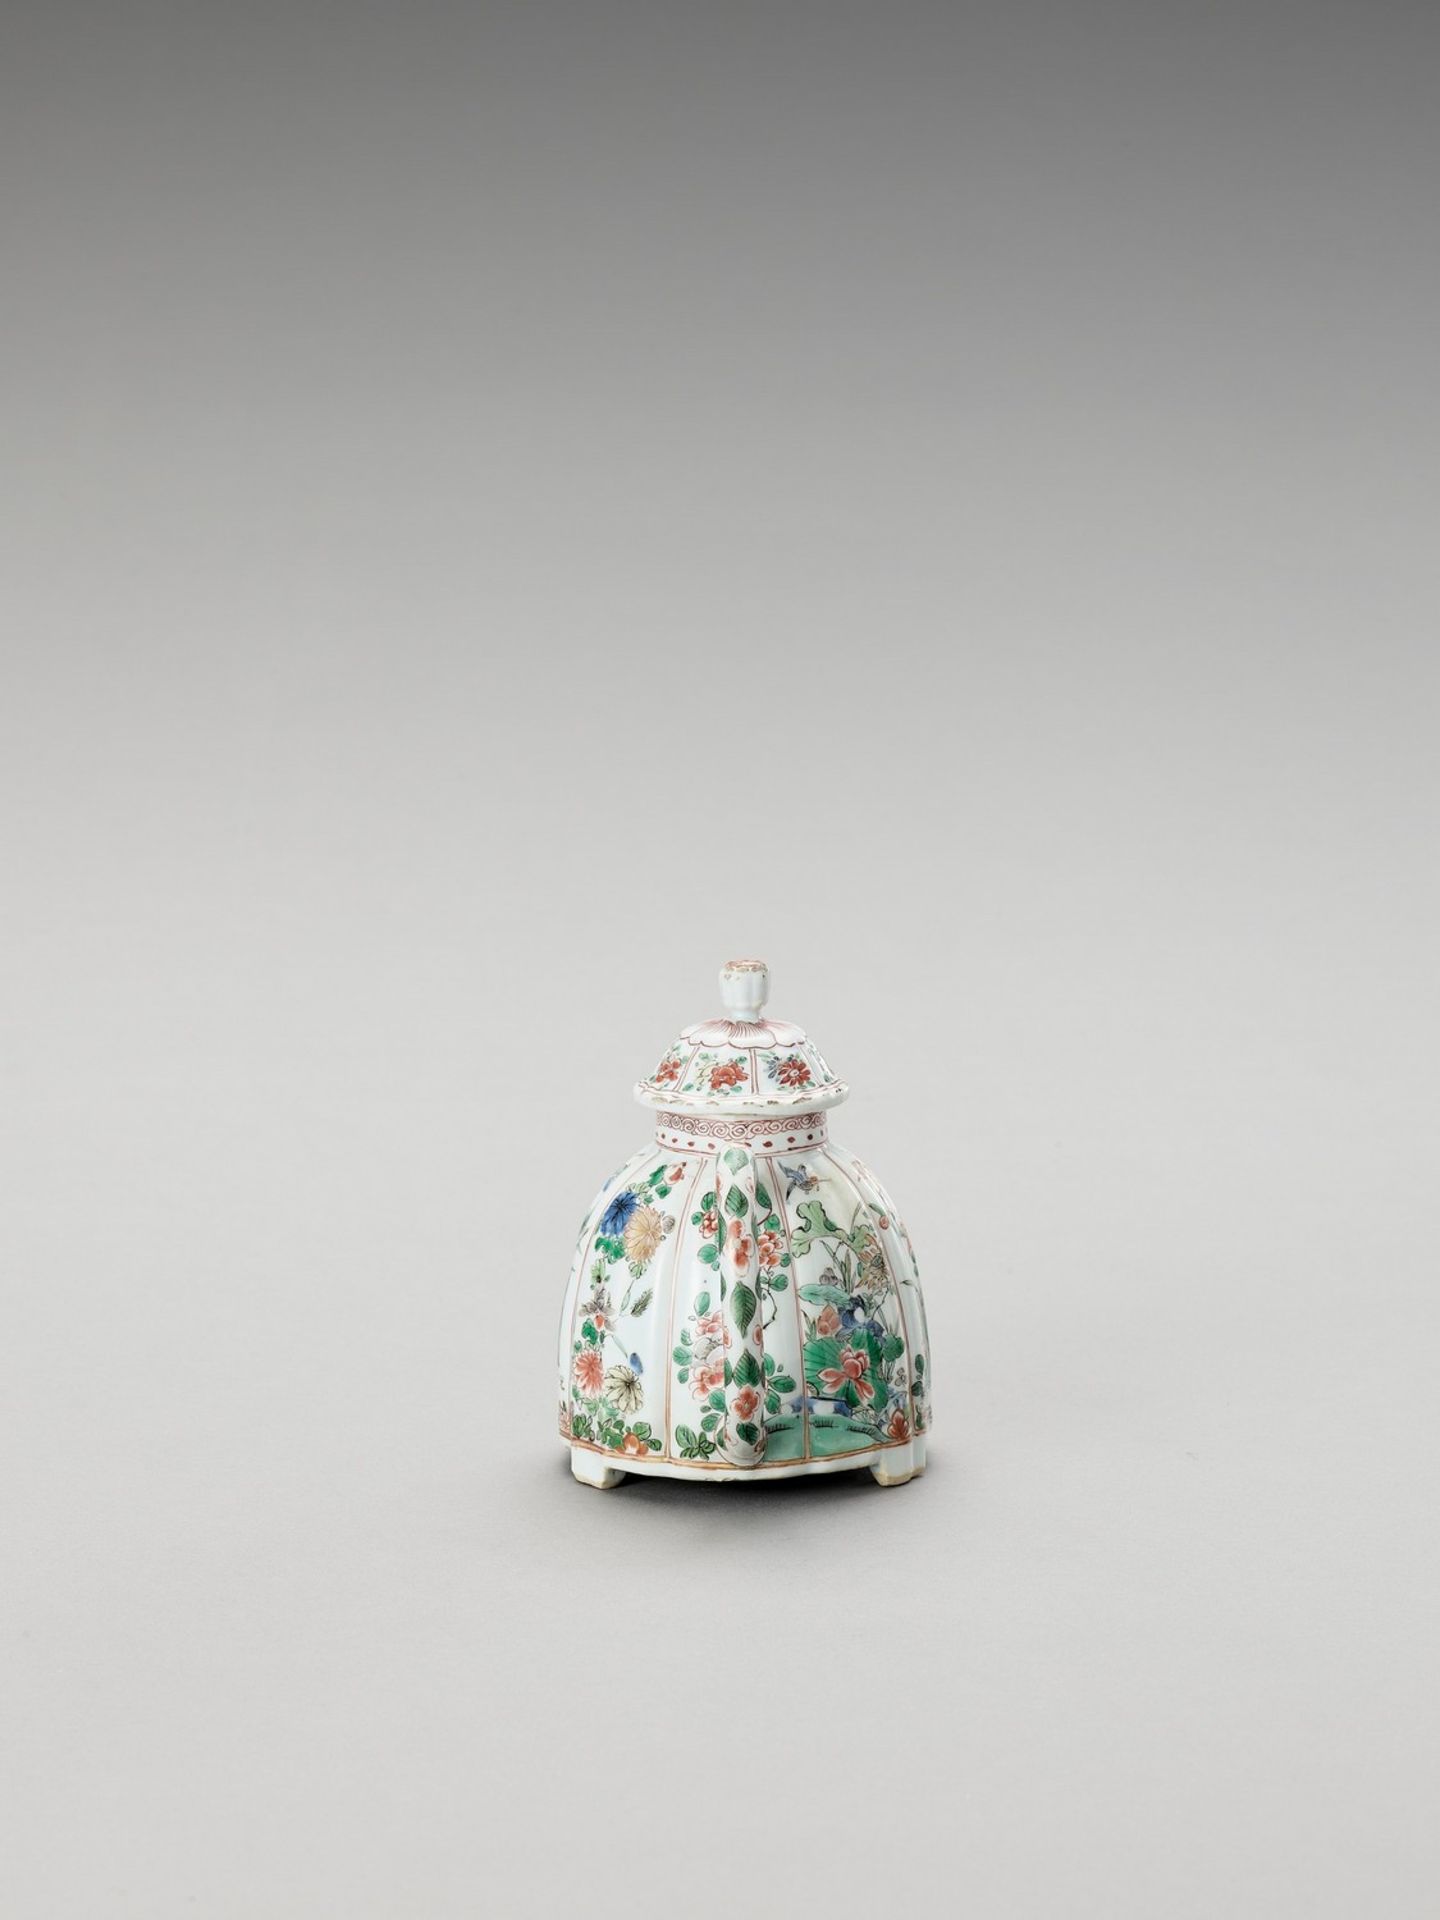 A FAMILLE VERTE TEAPOT AND COVER - Image 3 of 6